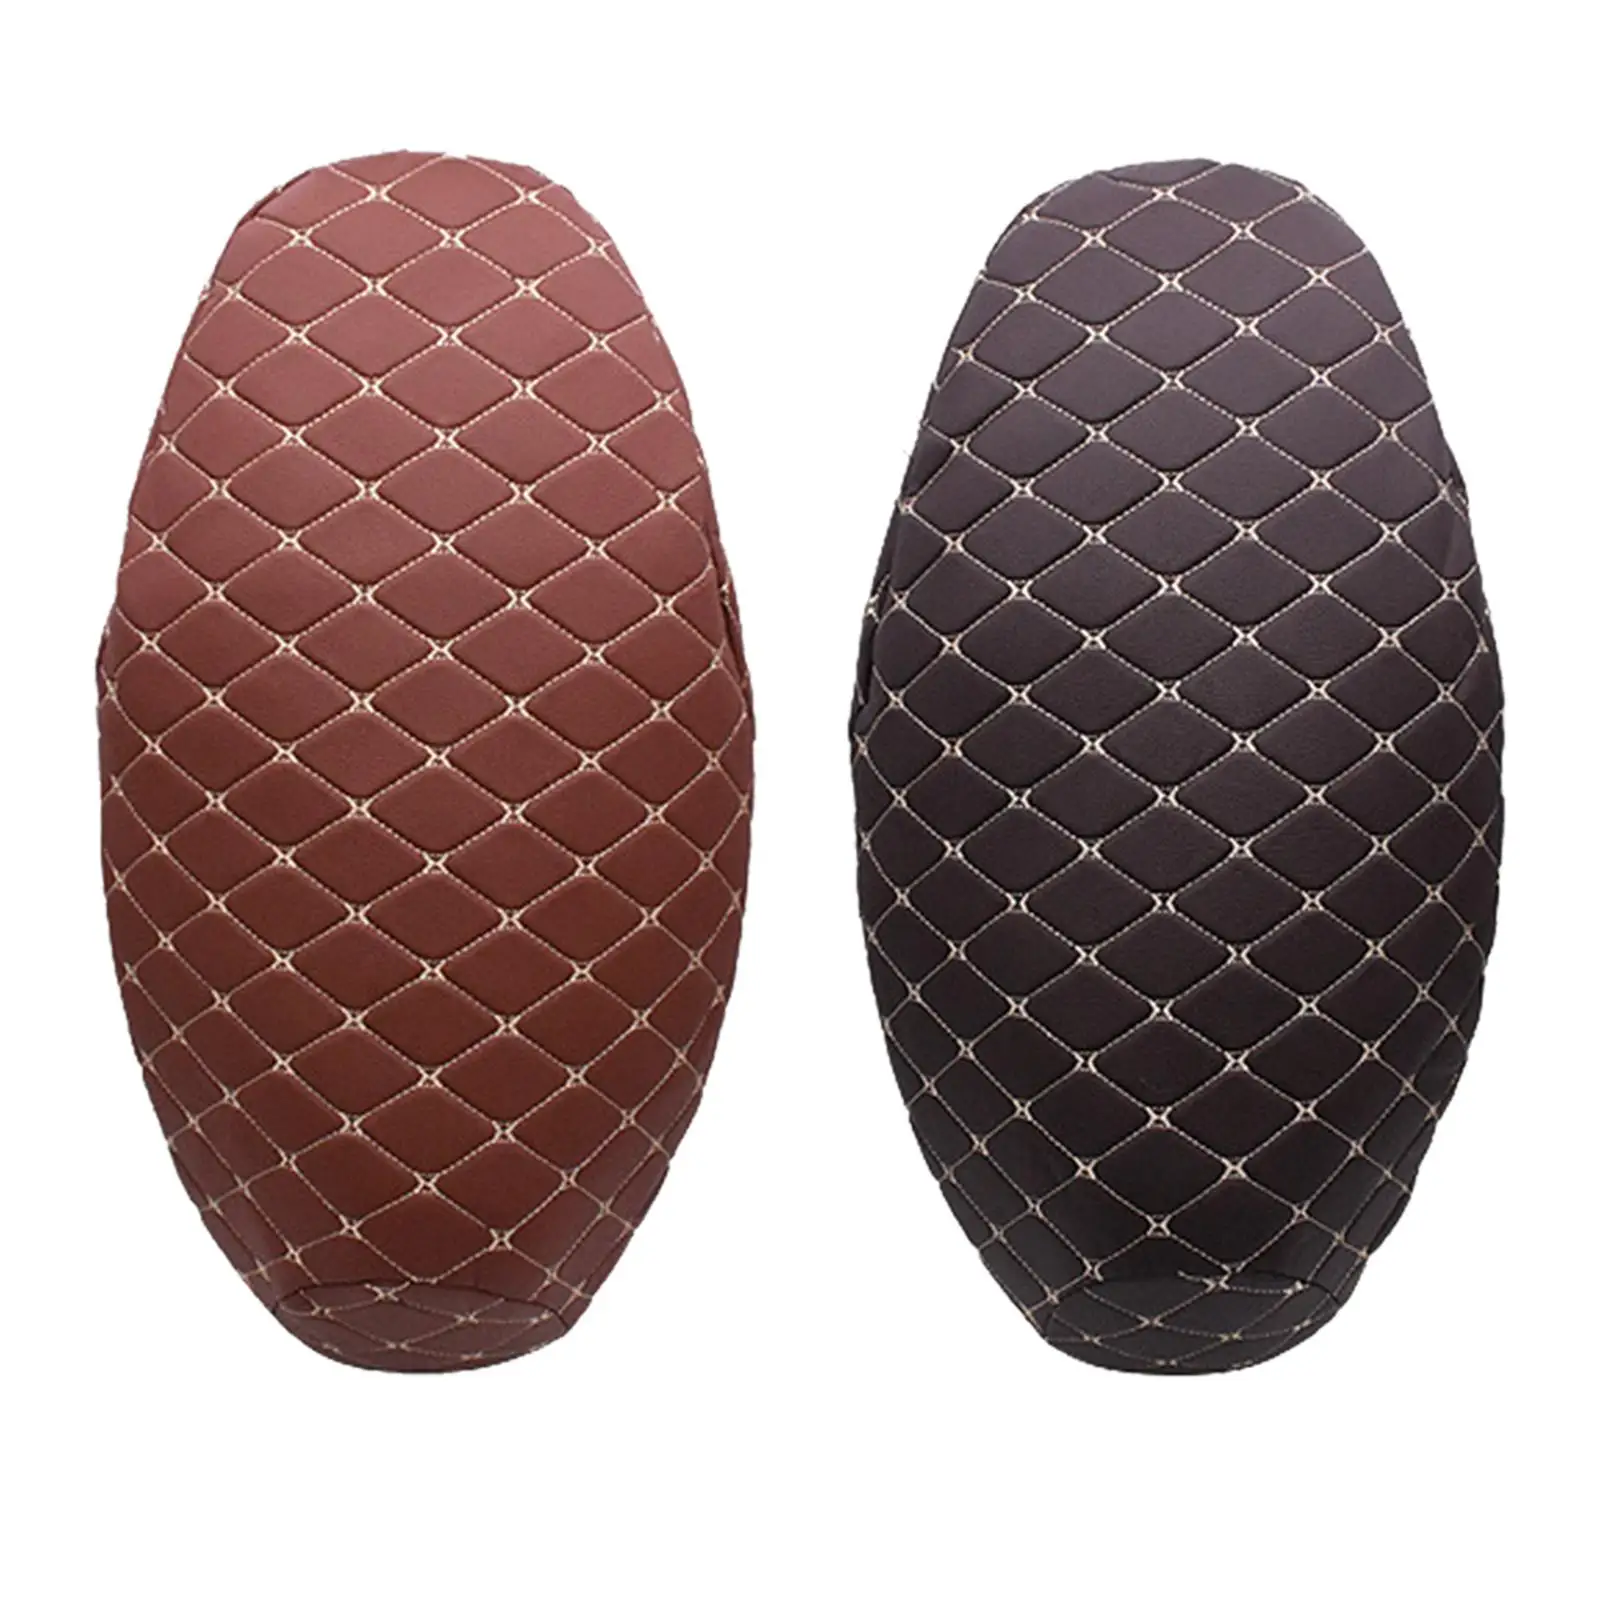 Motorcycle Seat Cushion Cover PU Leather Anti Slip Waterproof 3D Mesh Motorbike Seat Covers for Scooter Motorbike Vehicle